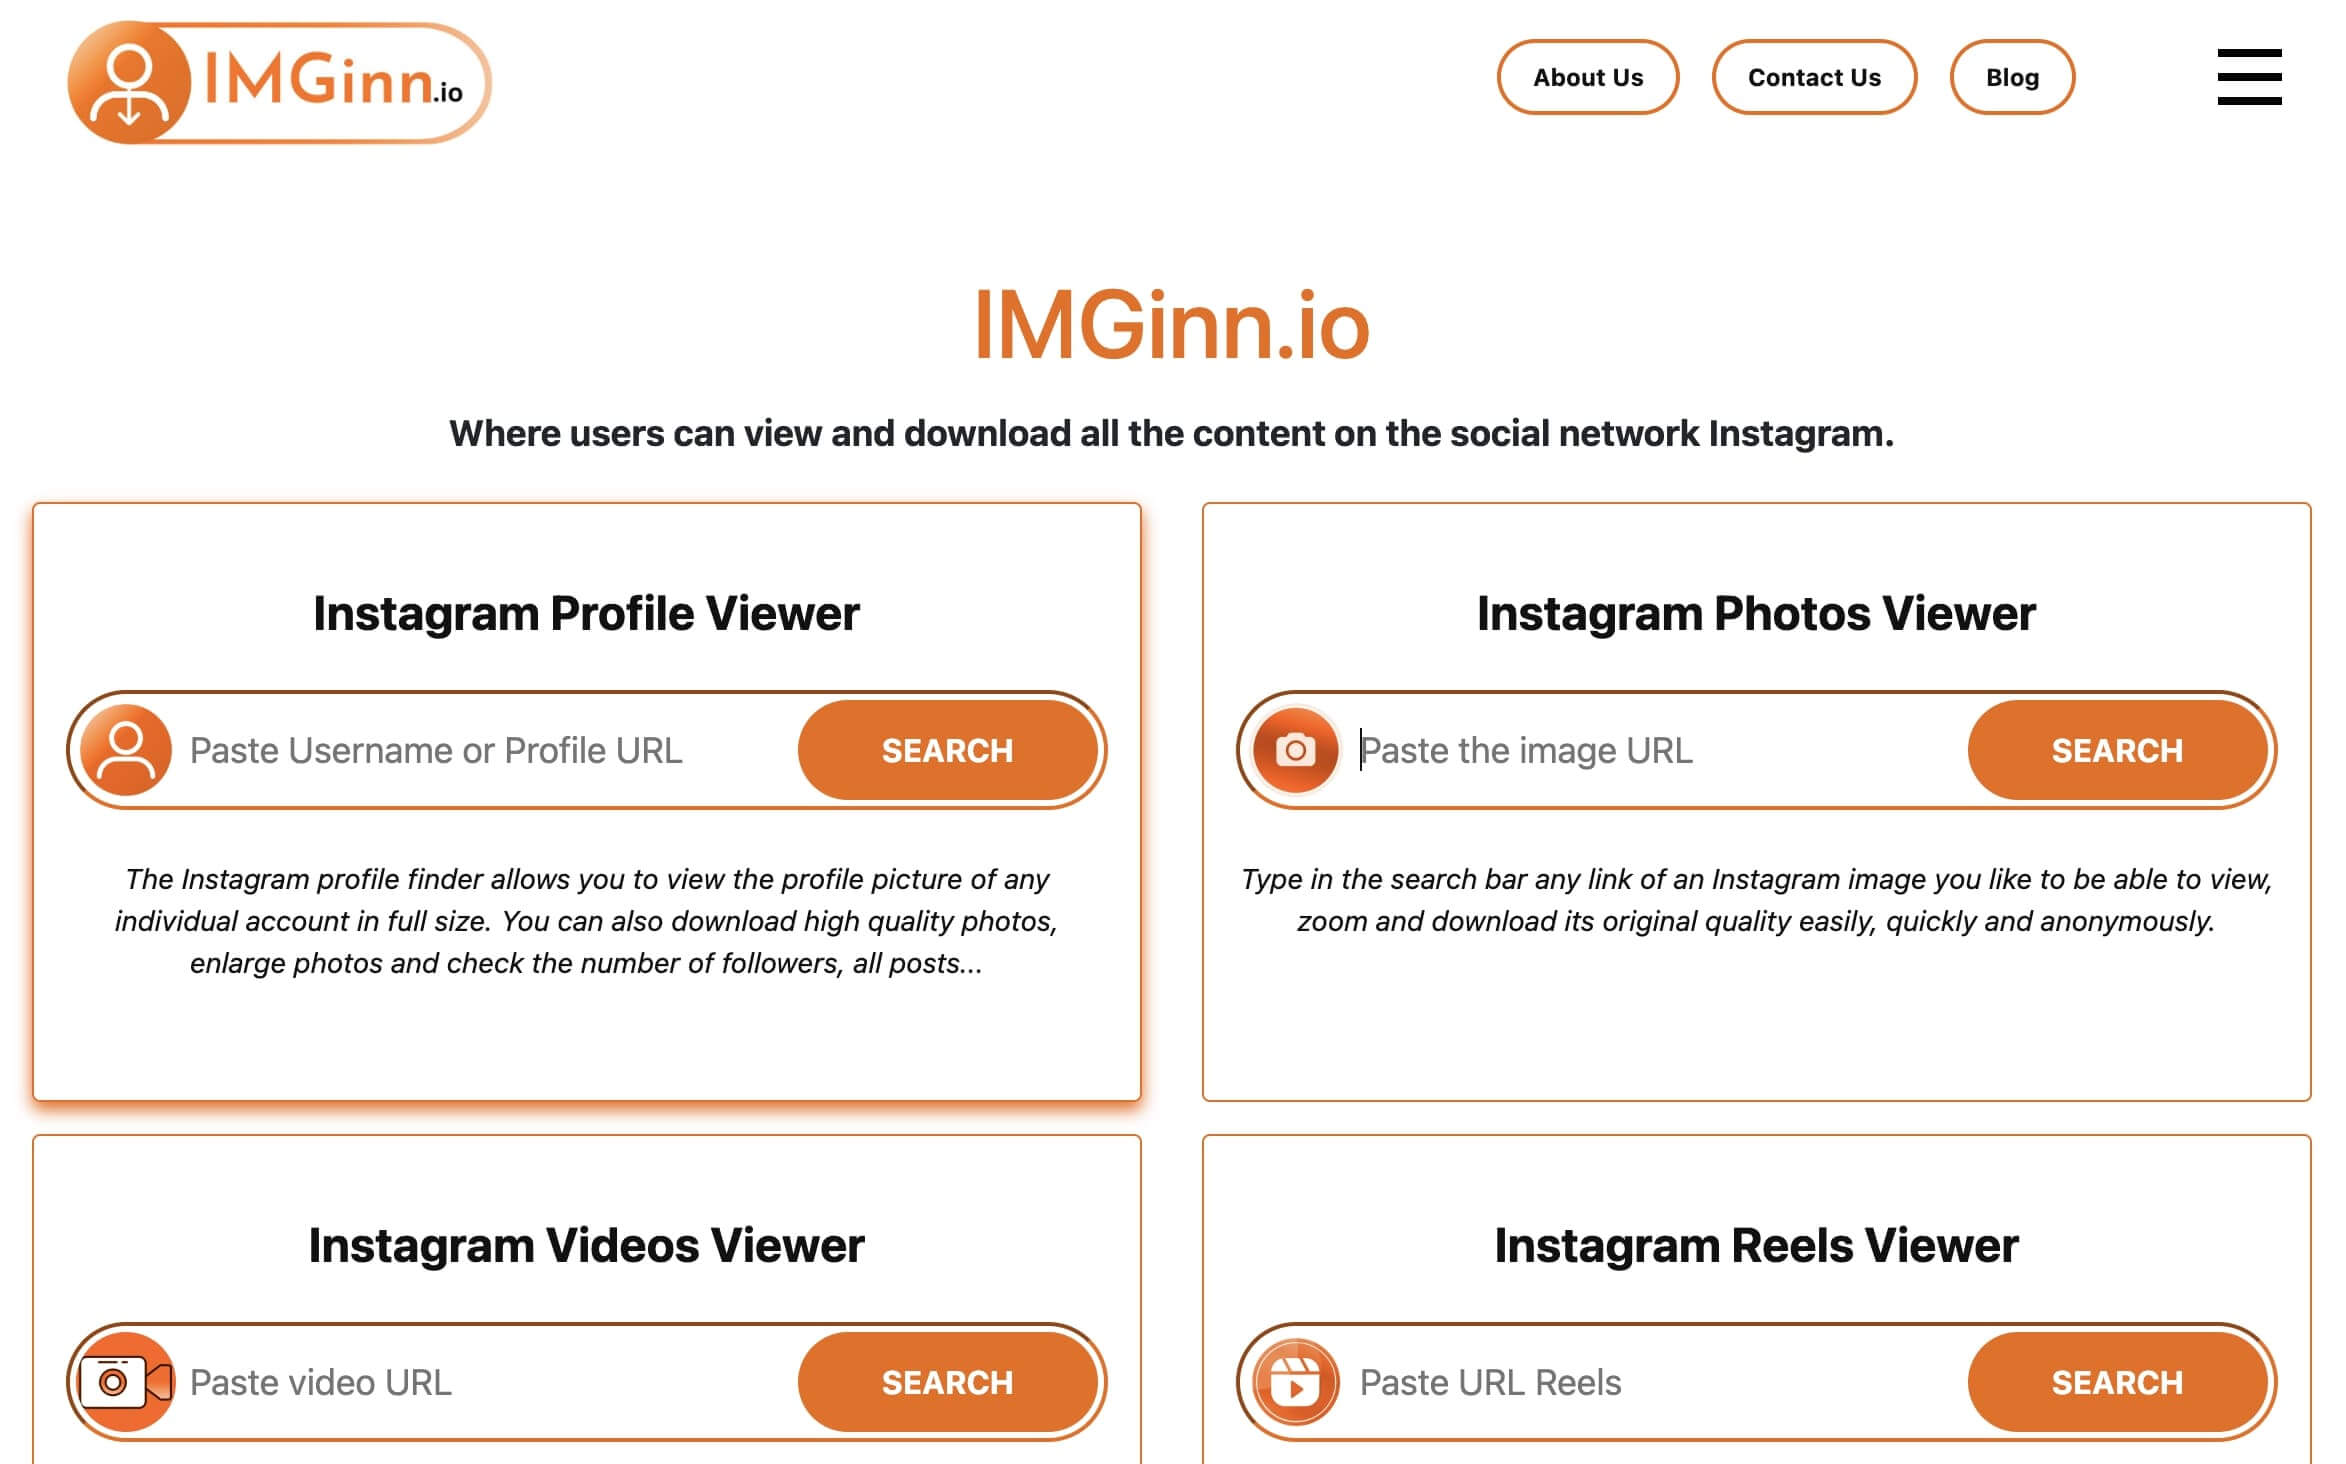 The Ultimate Guide to Boosting Your Presence: The imginn.io Instagram Profile with Posts and Stories